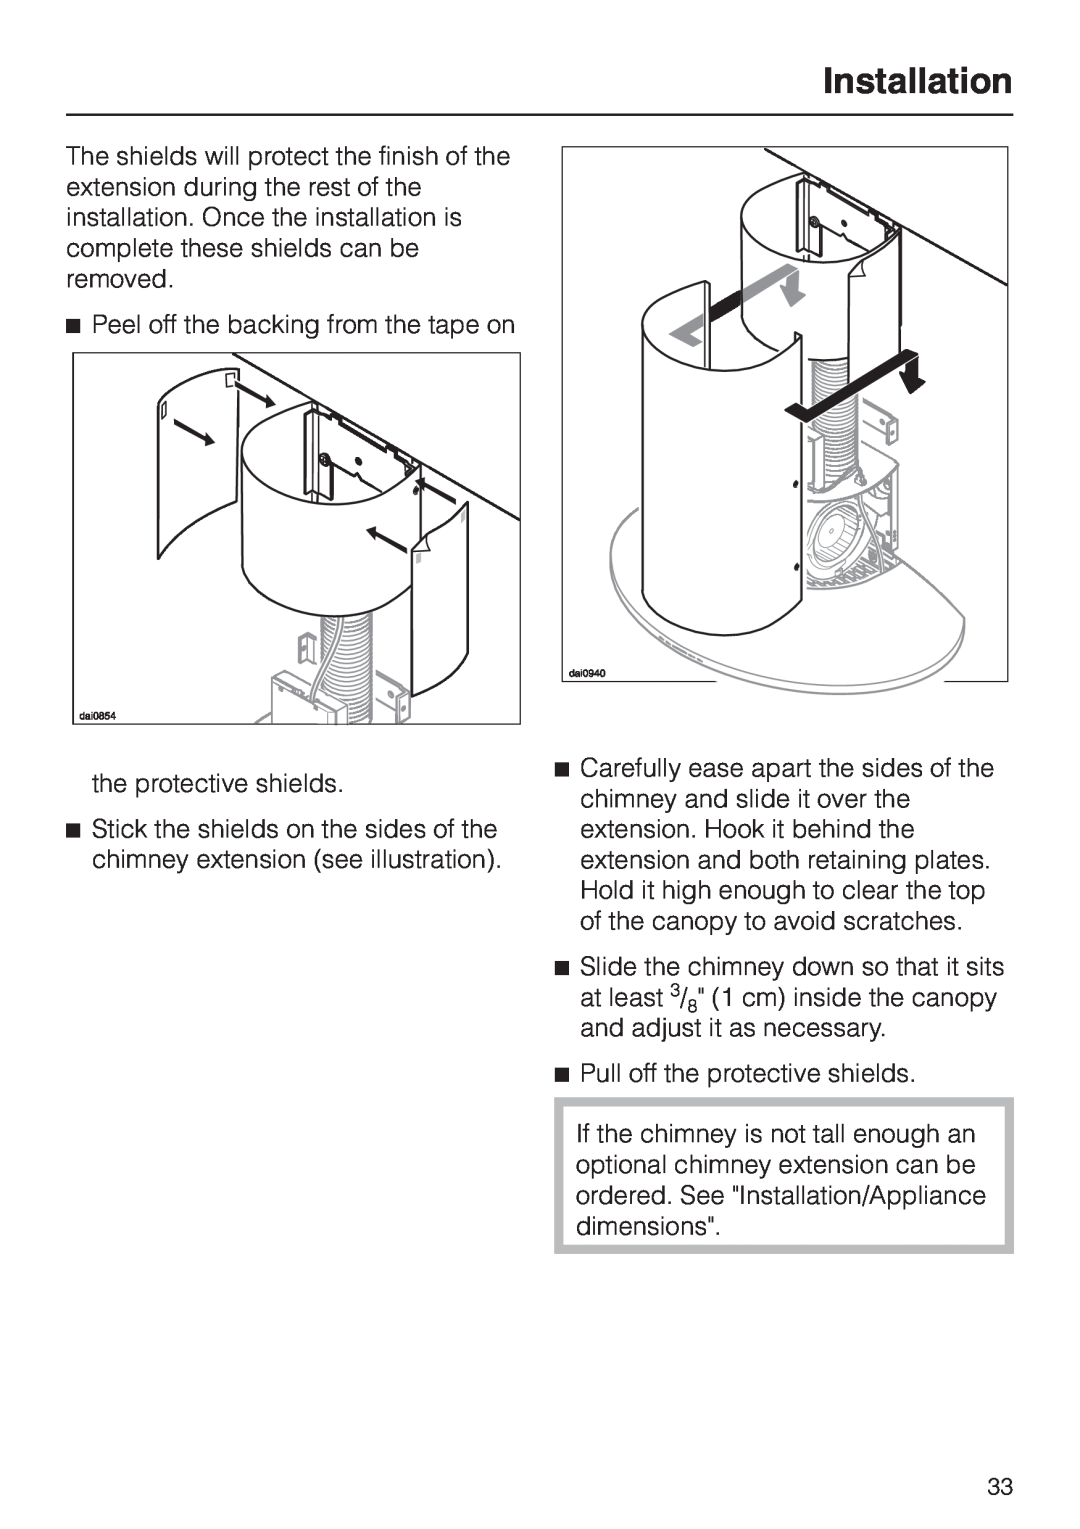 Miele DA239-3 installation instructions Installation, Peel off the backing from the tape on 